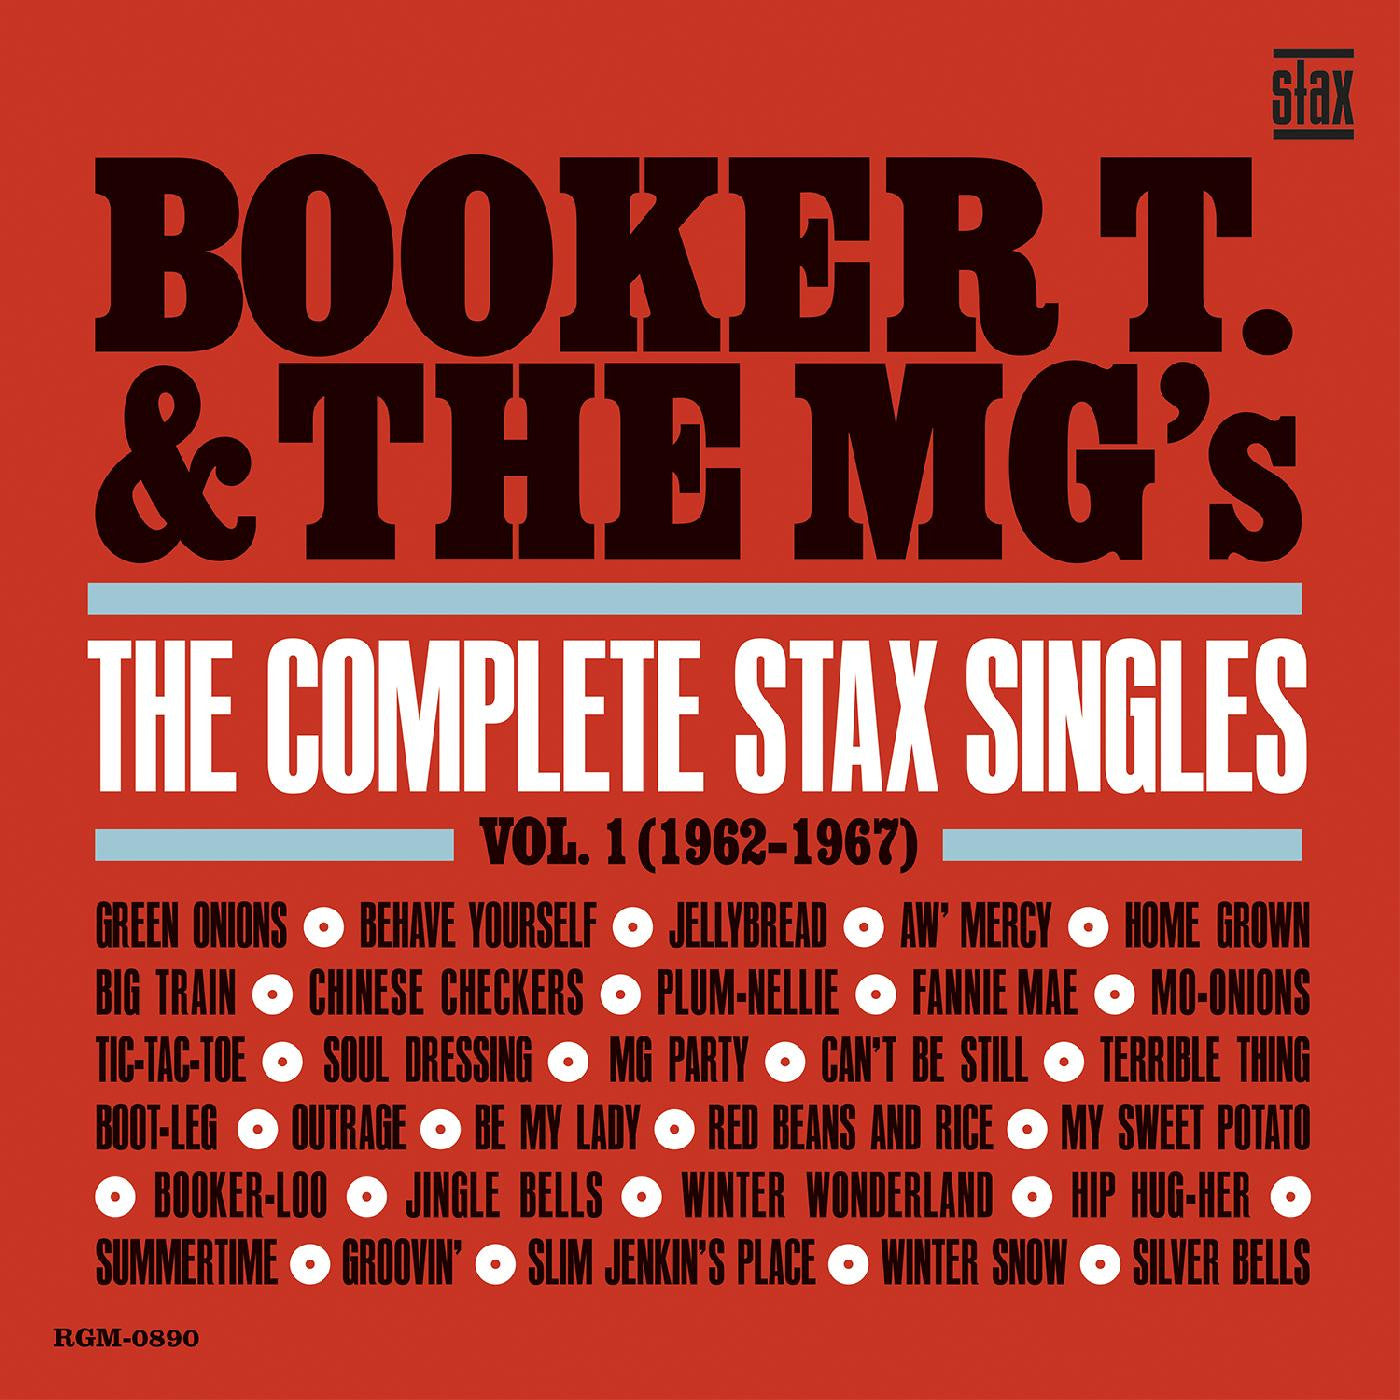 Booker T. & the MG's - The Complete Stax Singles Vol. 1 (1962-1967) [Red Vinyl] [2-lp]